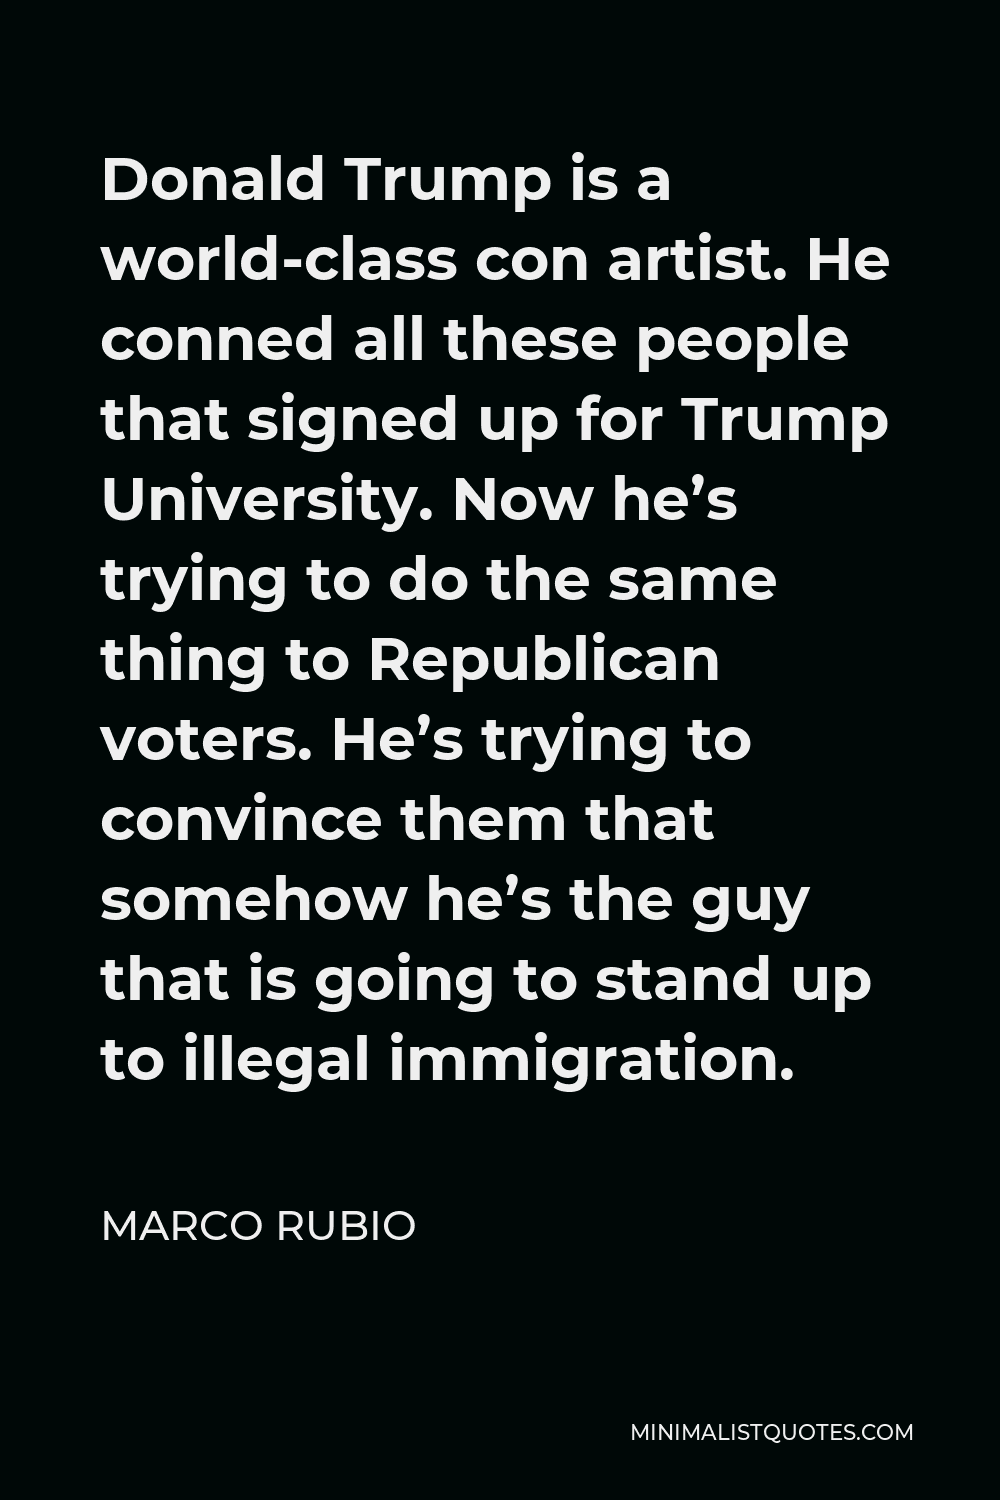 Marco Rubio Quote - Donald Trump is a world-class con artist. He conned all these people that signed up for Trump University. Now he’s trying to do the same thing to Republican voters. He’s trying to convince them that somehow he’s the guy that is going to stand up to illegal immigration.